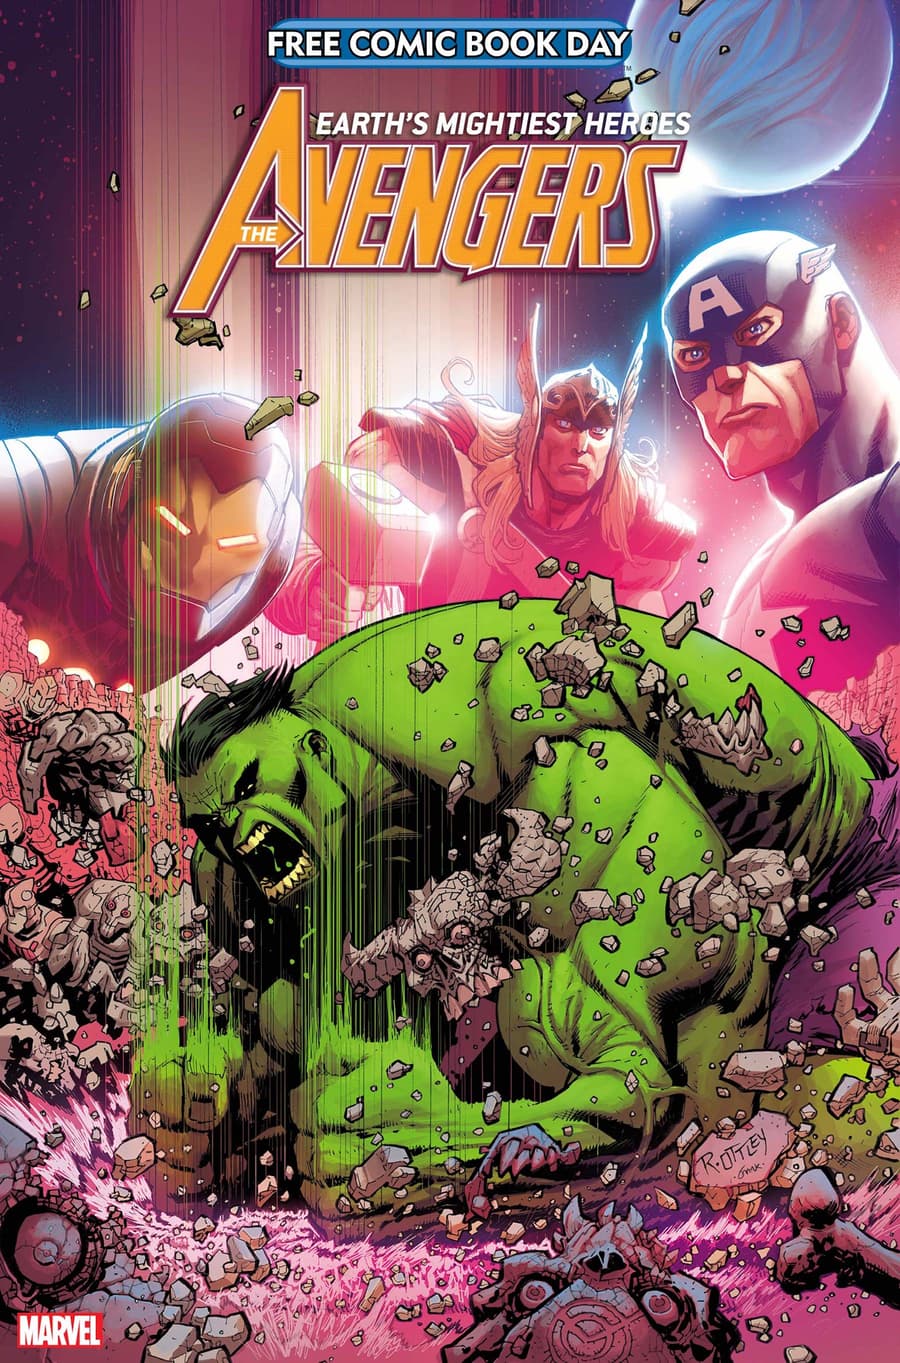 FREE COMIC BOOK DAY 2021: AVENGERS/HULK cover by Ryan Ottley